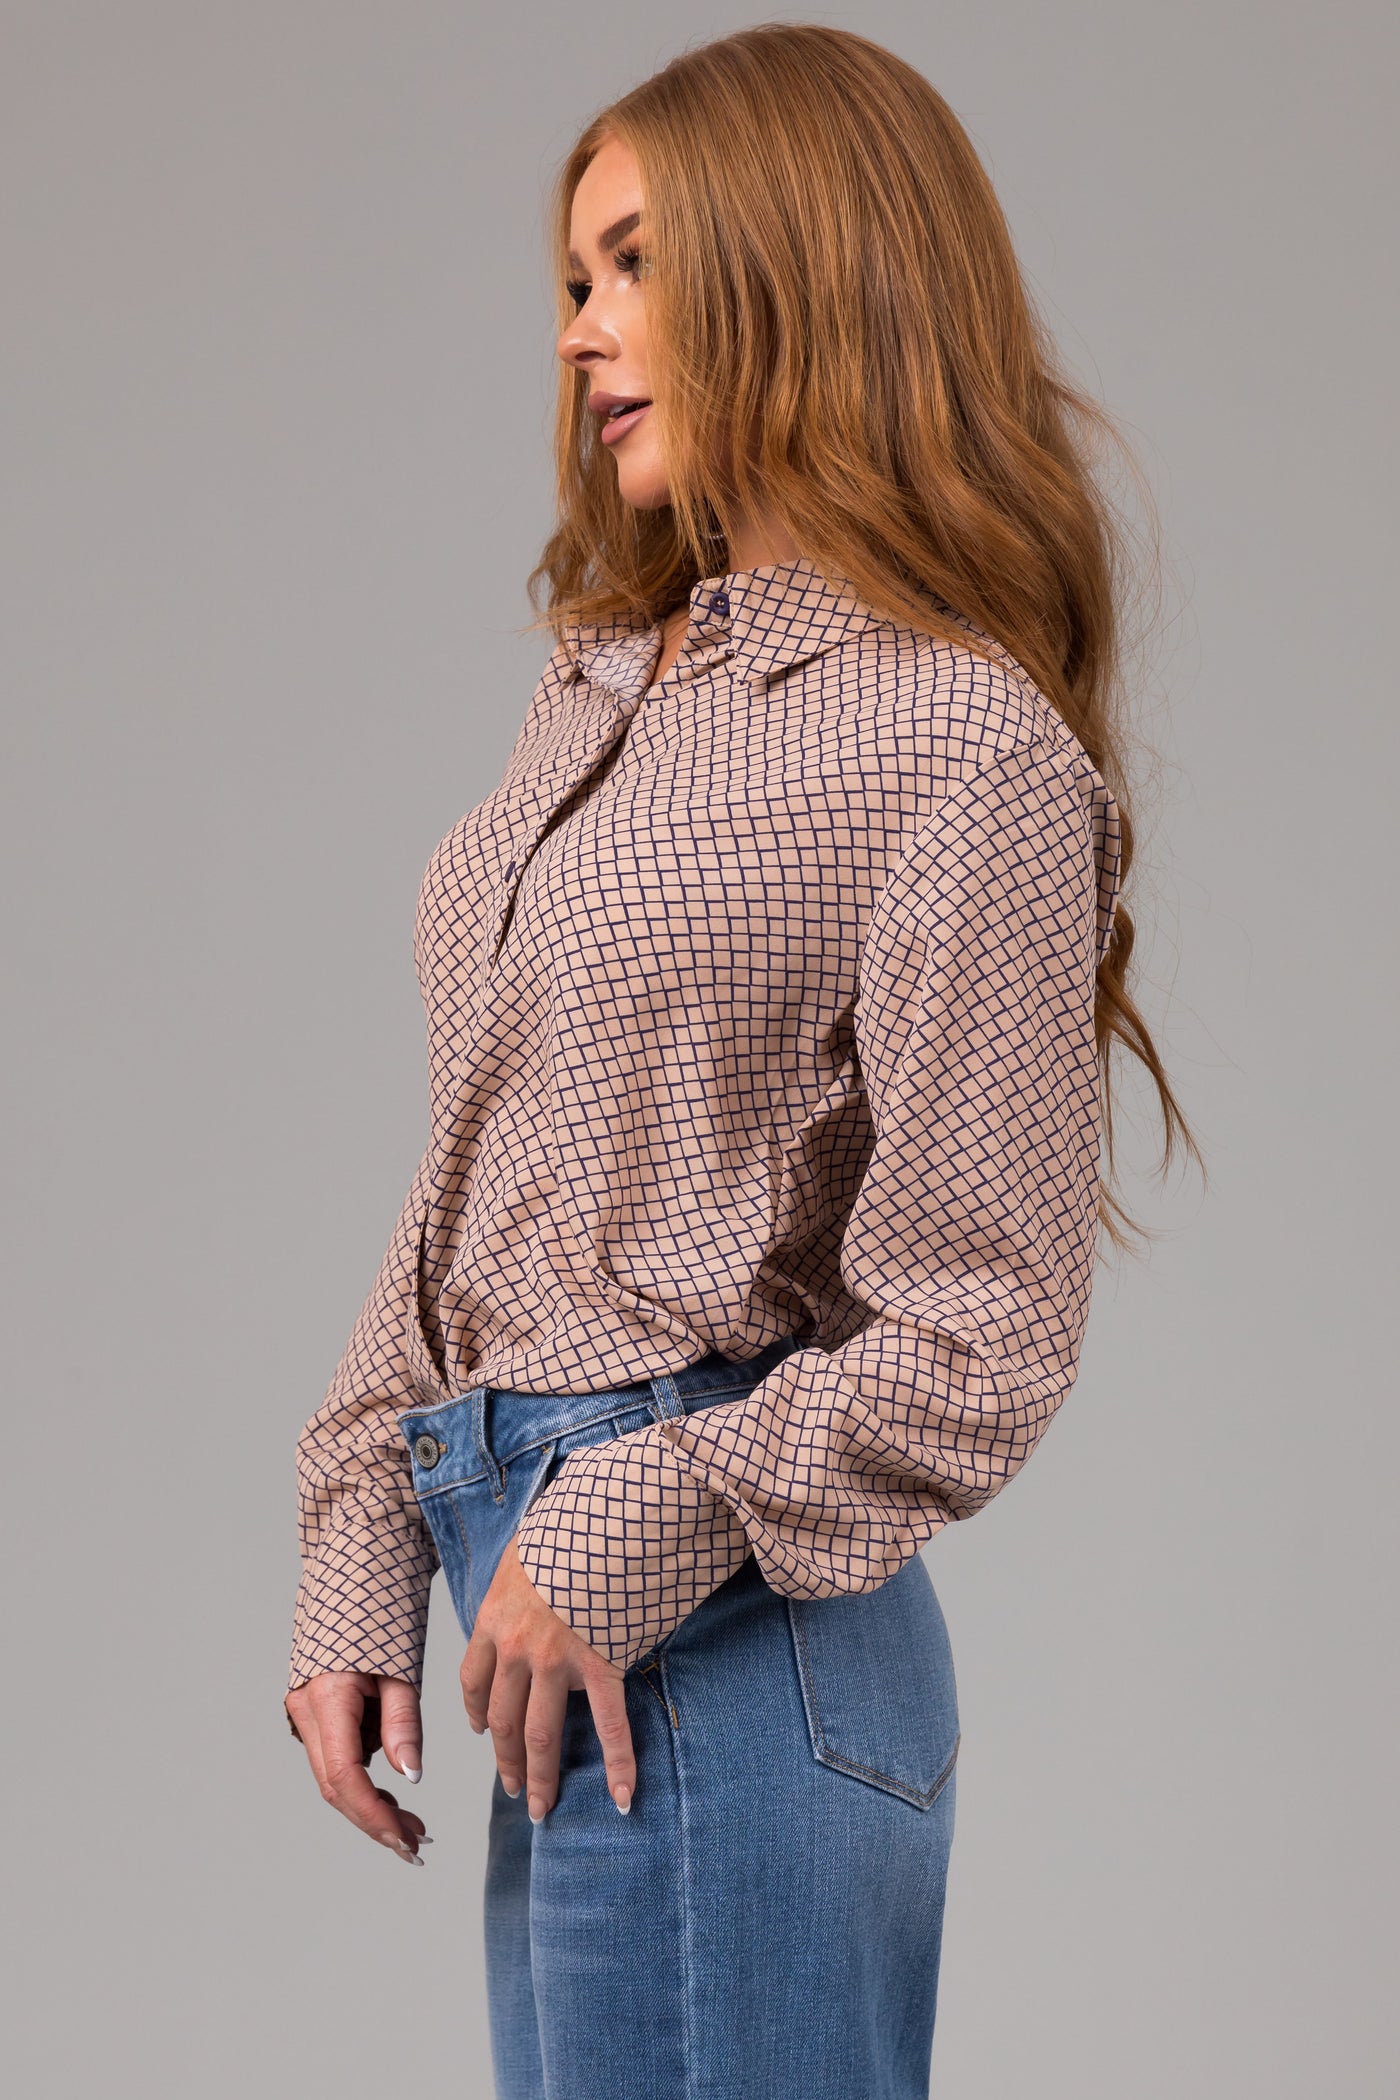 Latte and Navy Honeycomb Patterned Blouse